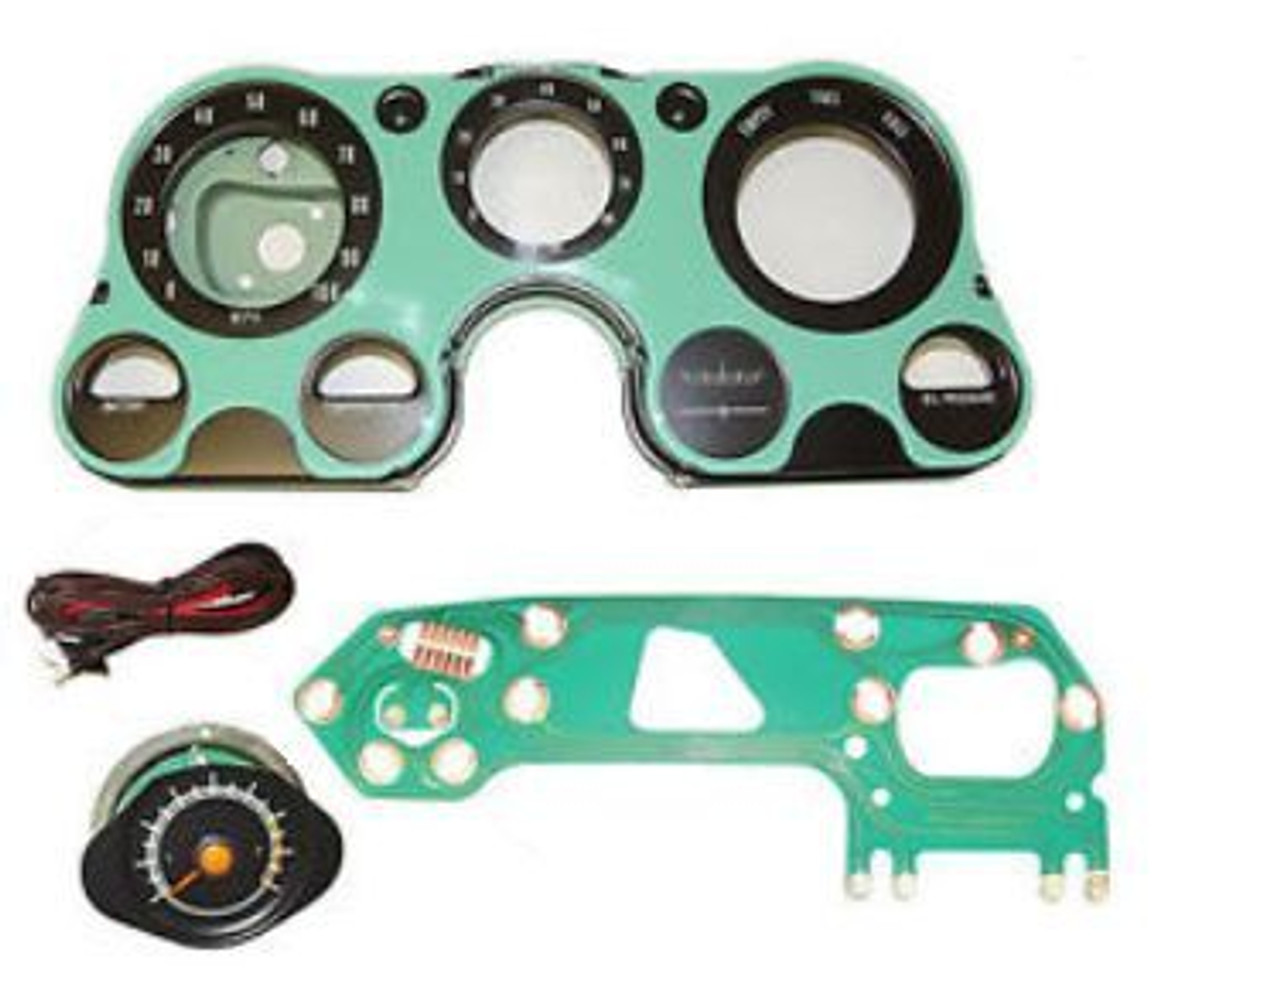 1967-72 Chevy/GMC Truck Tachometer Conversion Kit. (w/custom 8000 RPM tachometer)(includes 8000 RPM tachometer, printed circuit, instrument lens, front and back gauge housings, and tach wiring harness)